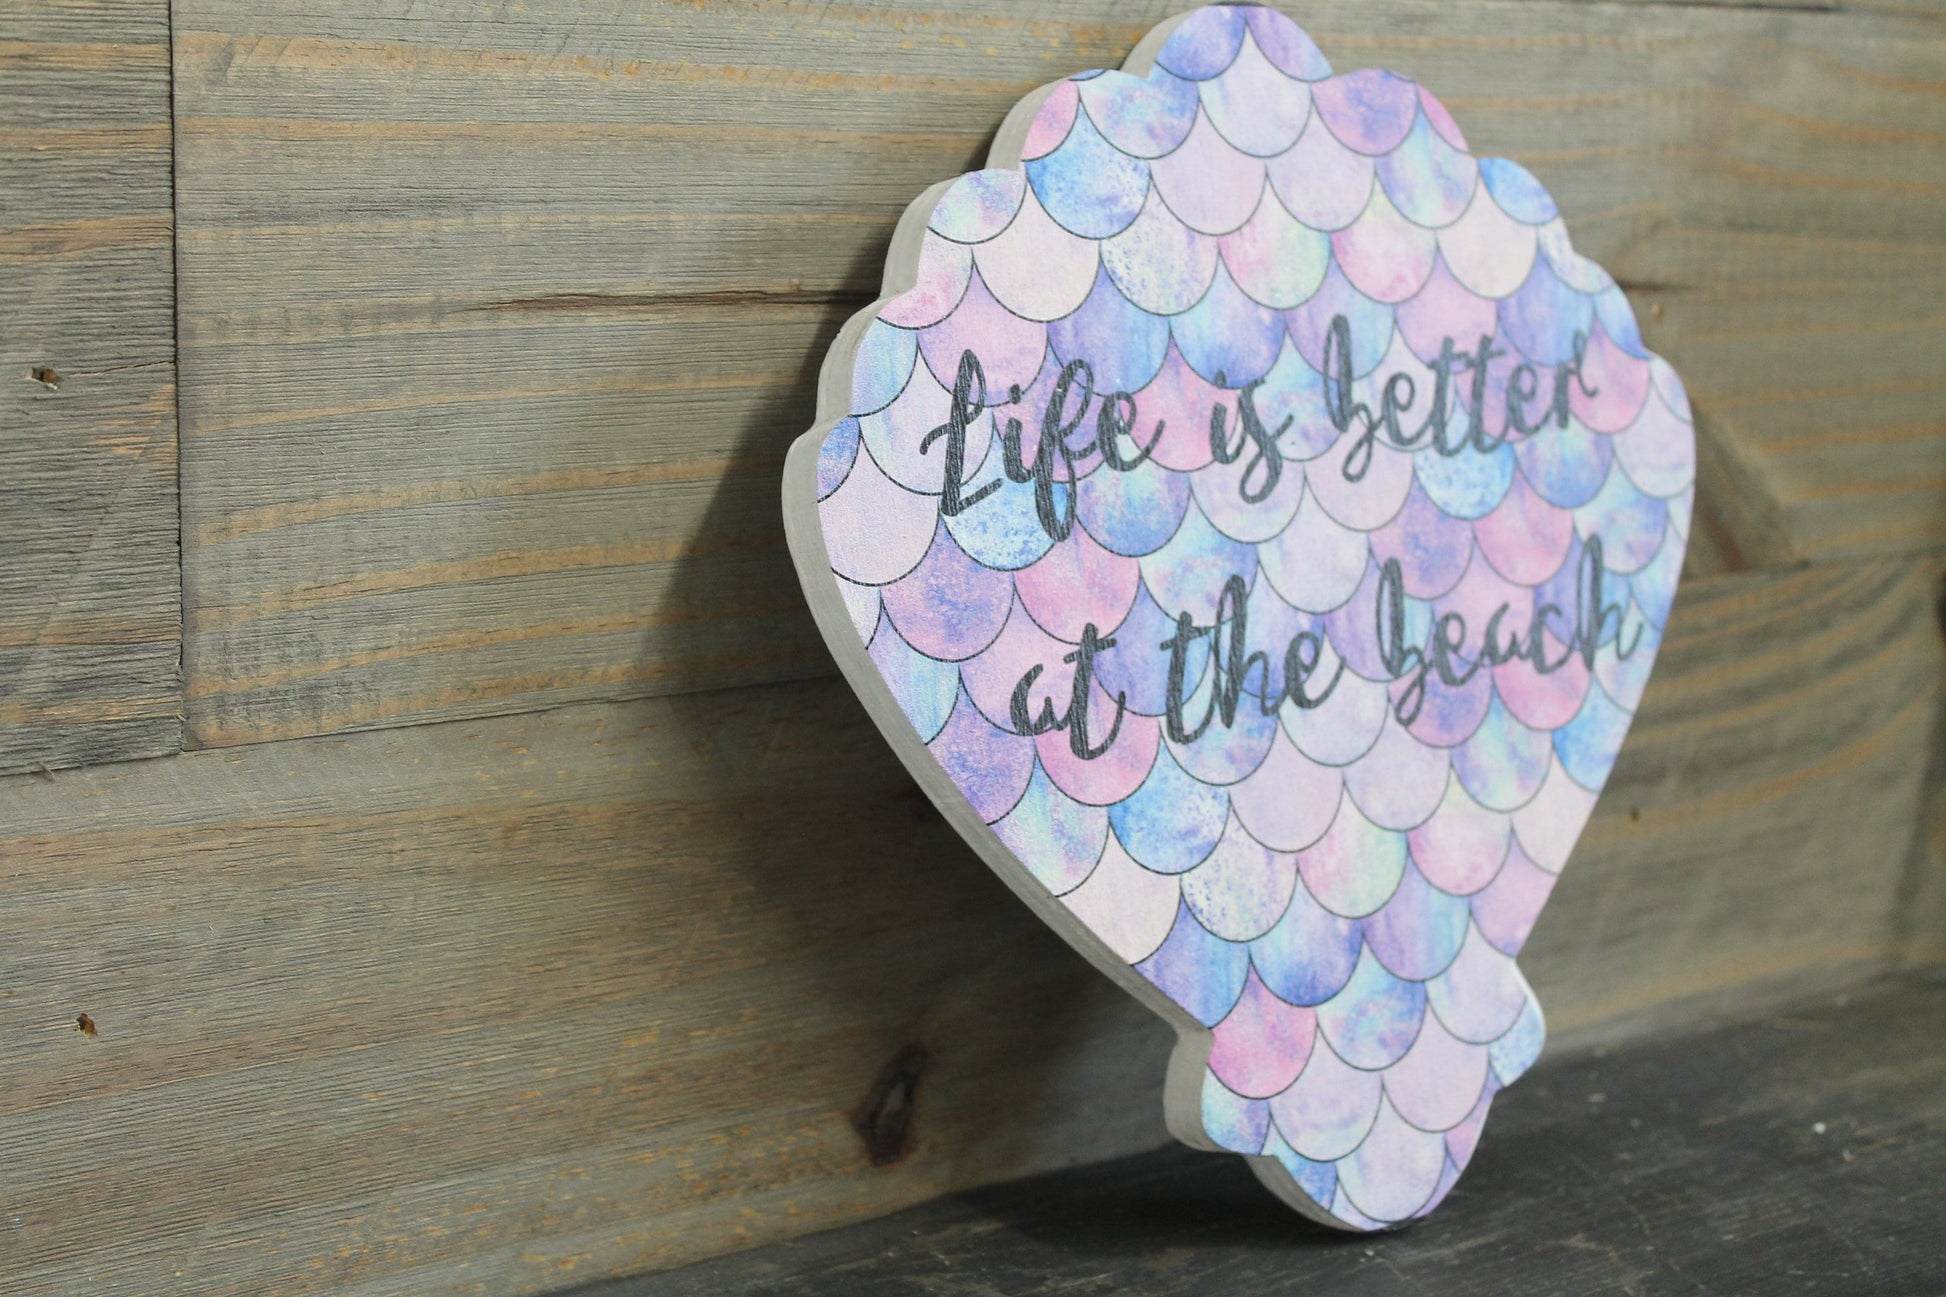 Seashell Printed Wood Decor Life is better at the beach Mermaid Beach Decor Home decor Gift Printed Decoration